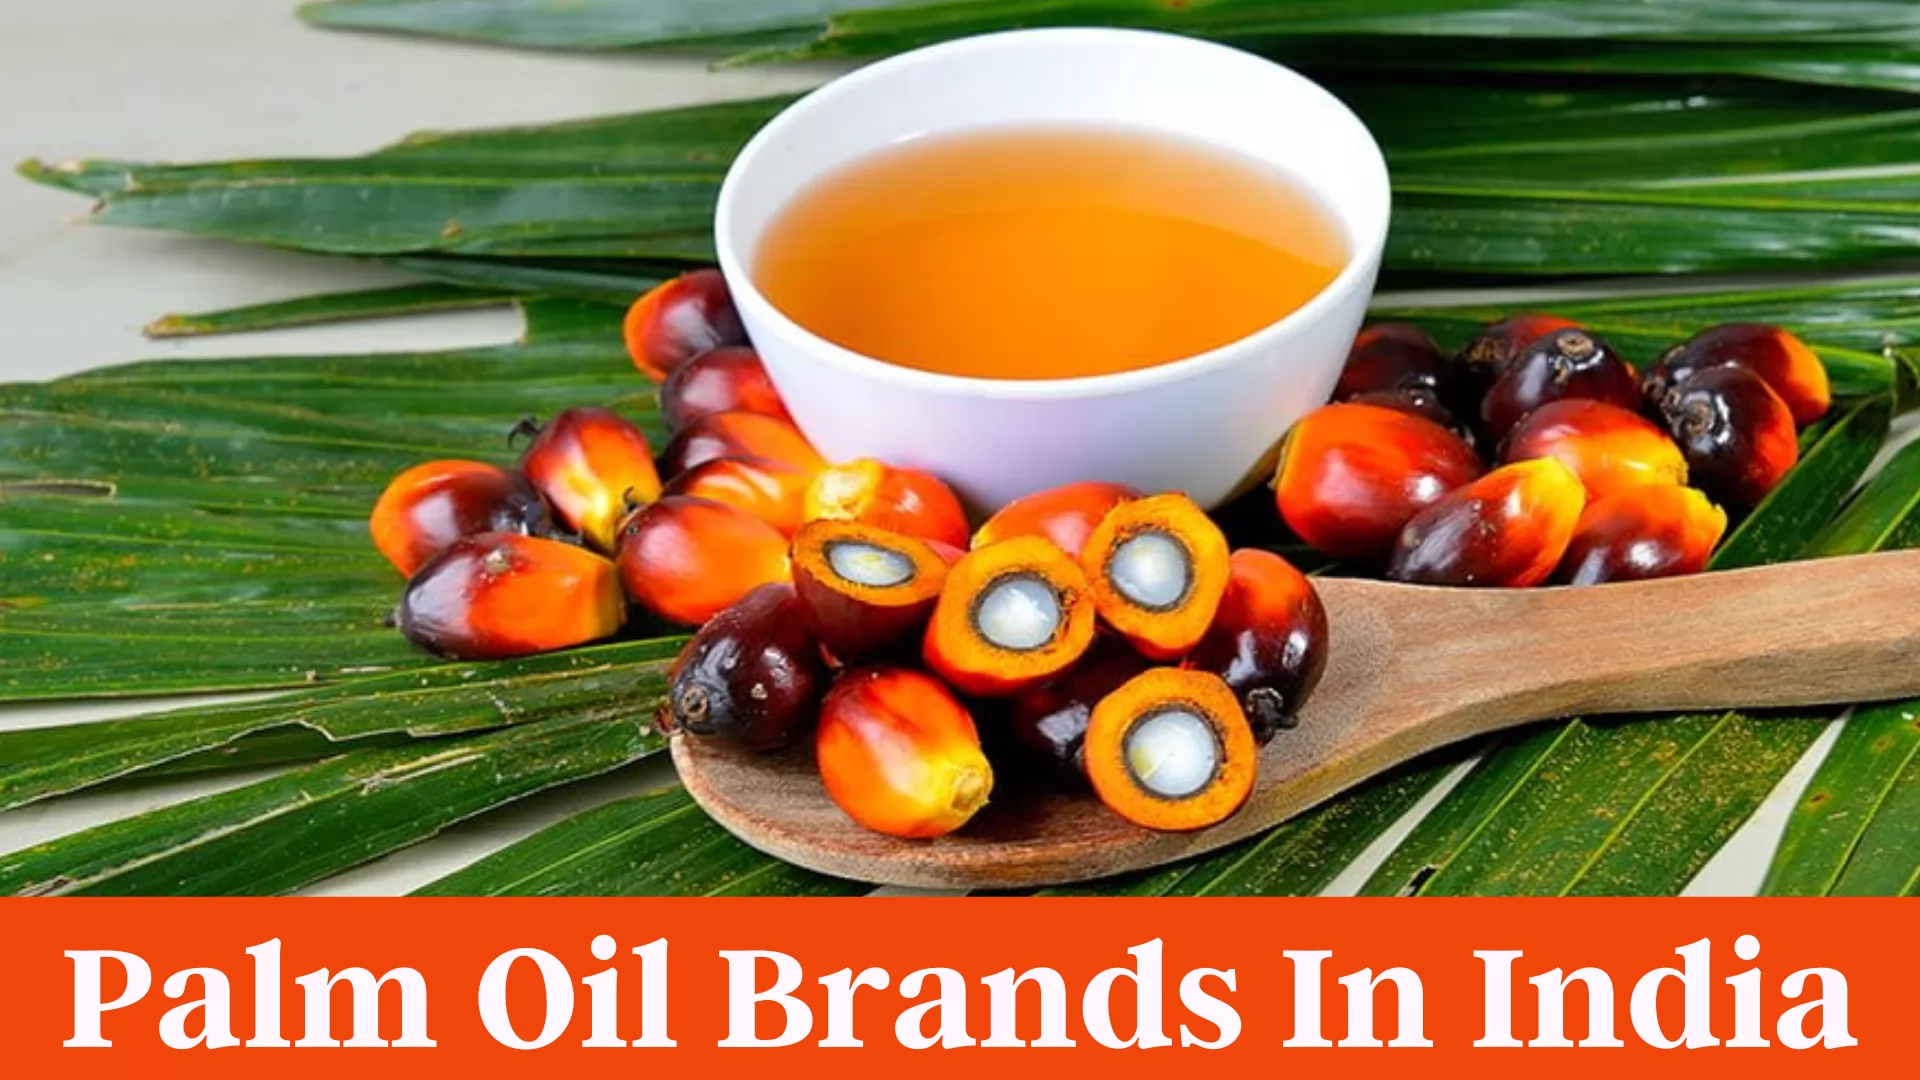 Palm Oil Brands In India